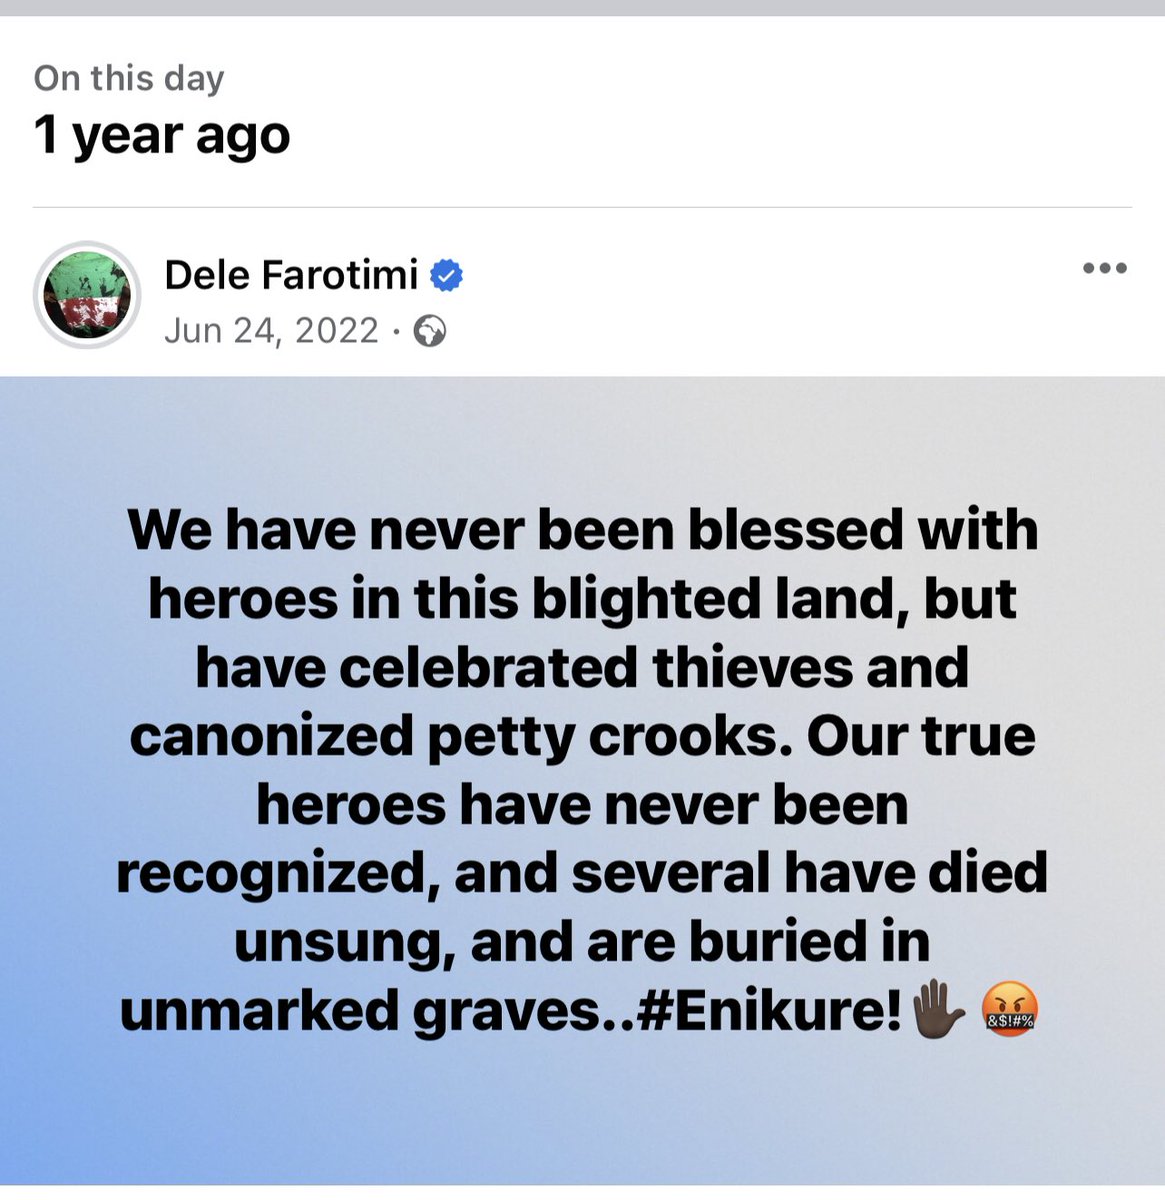 We have never been blessed with heroes in this blighted land, but have celebrated thieves and canonized petty crooks. Our true heroes have never been recognized, and several have died unsung, and are buried in unmarked graves..#Enikure!✋🏿🤬